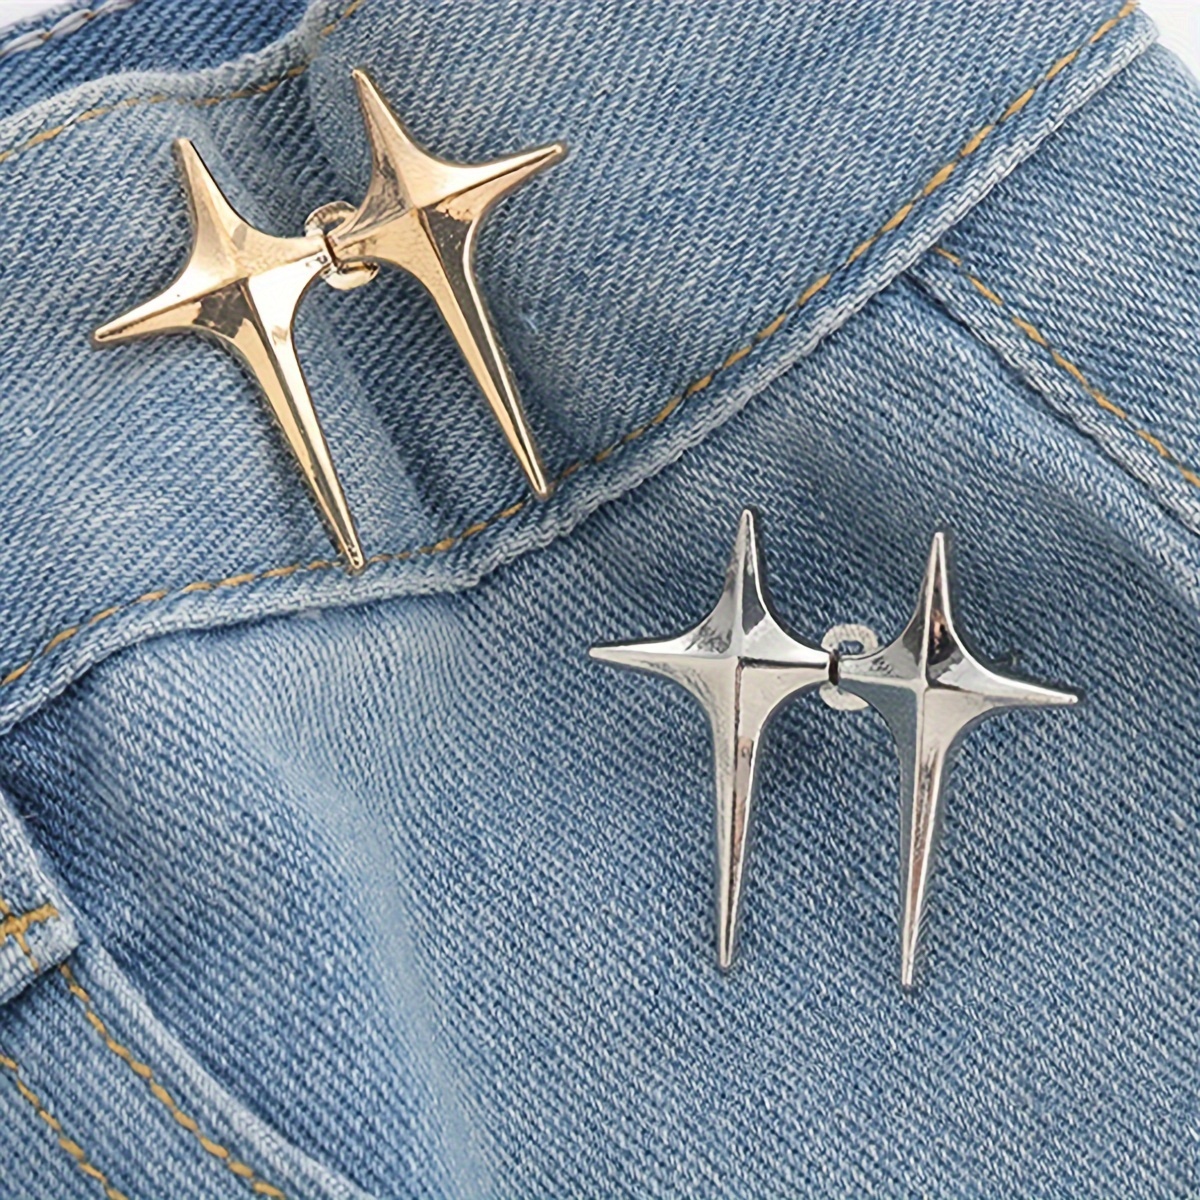 1PCS Star Tightener Adjustable Waist Buckle For Jeans, No Sewing Required  Button Adjuster For Pants And Skirts Waist